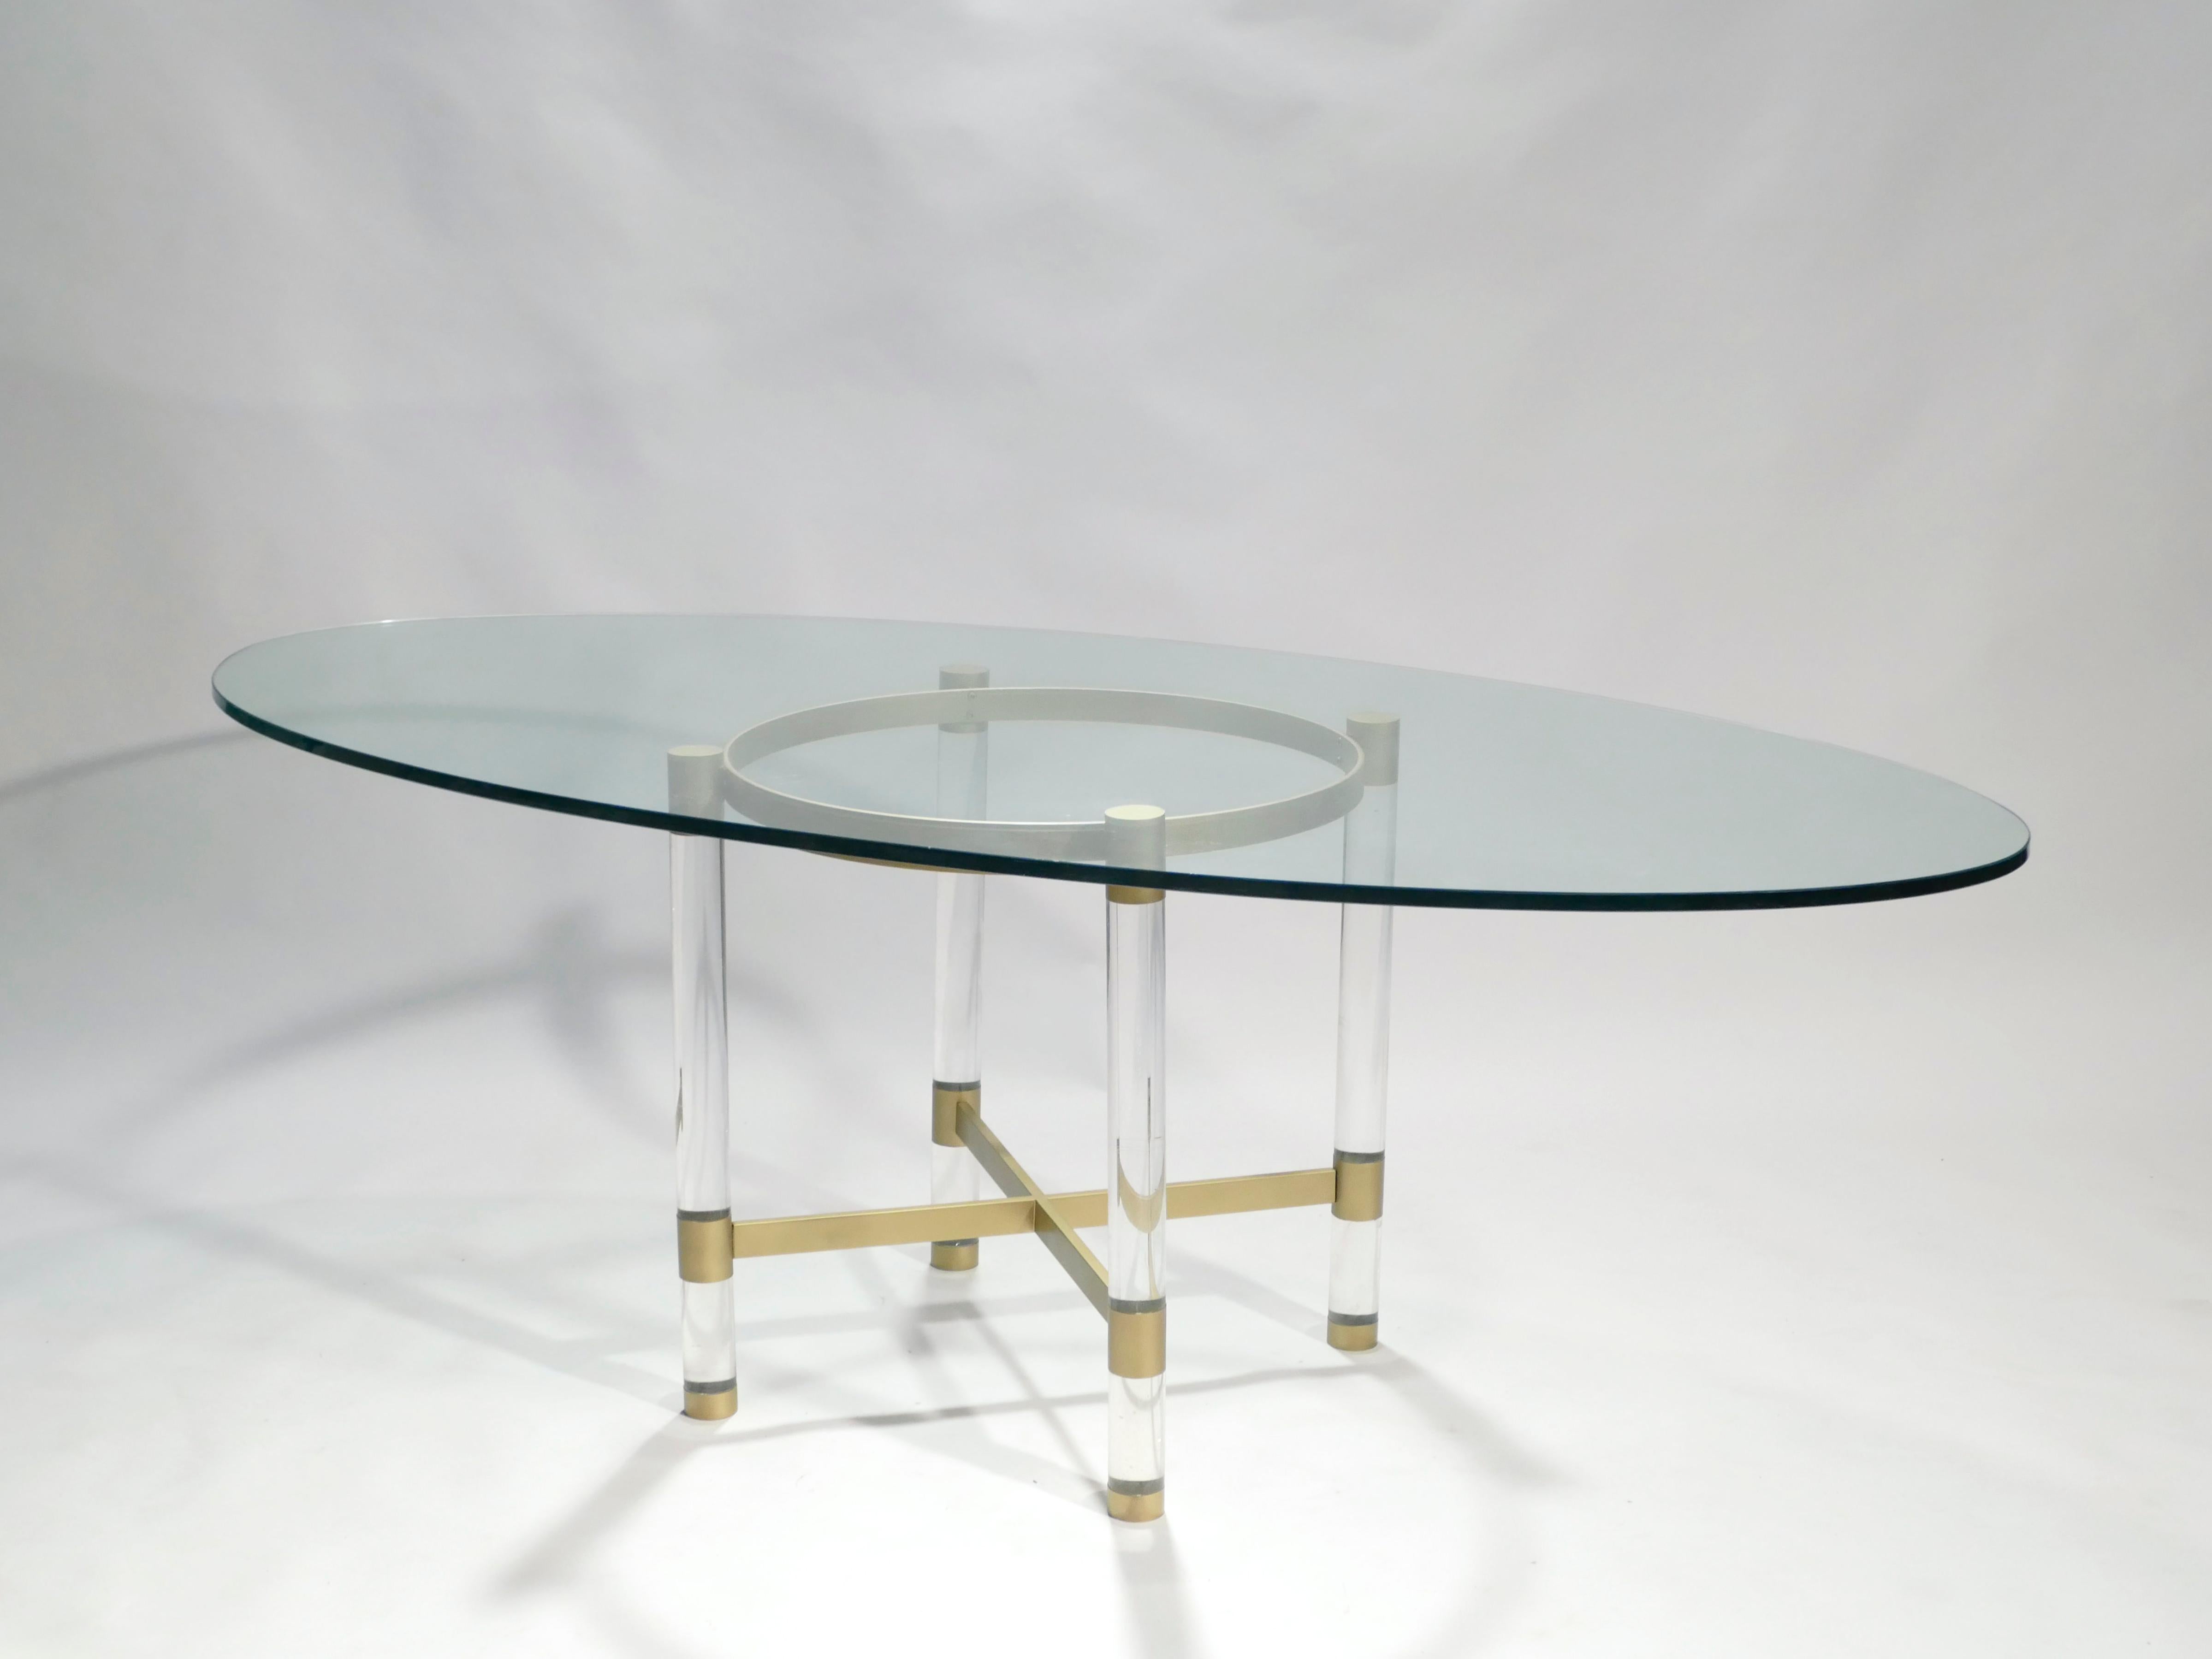 Italian Brass and Lucite Dining Table by Sandro Petti for Metalarte, 1970s